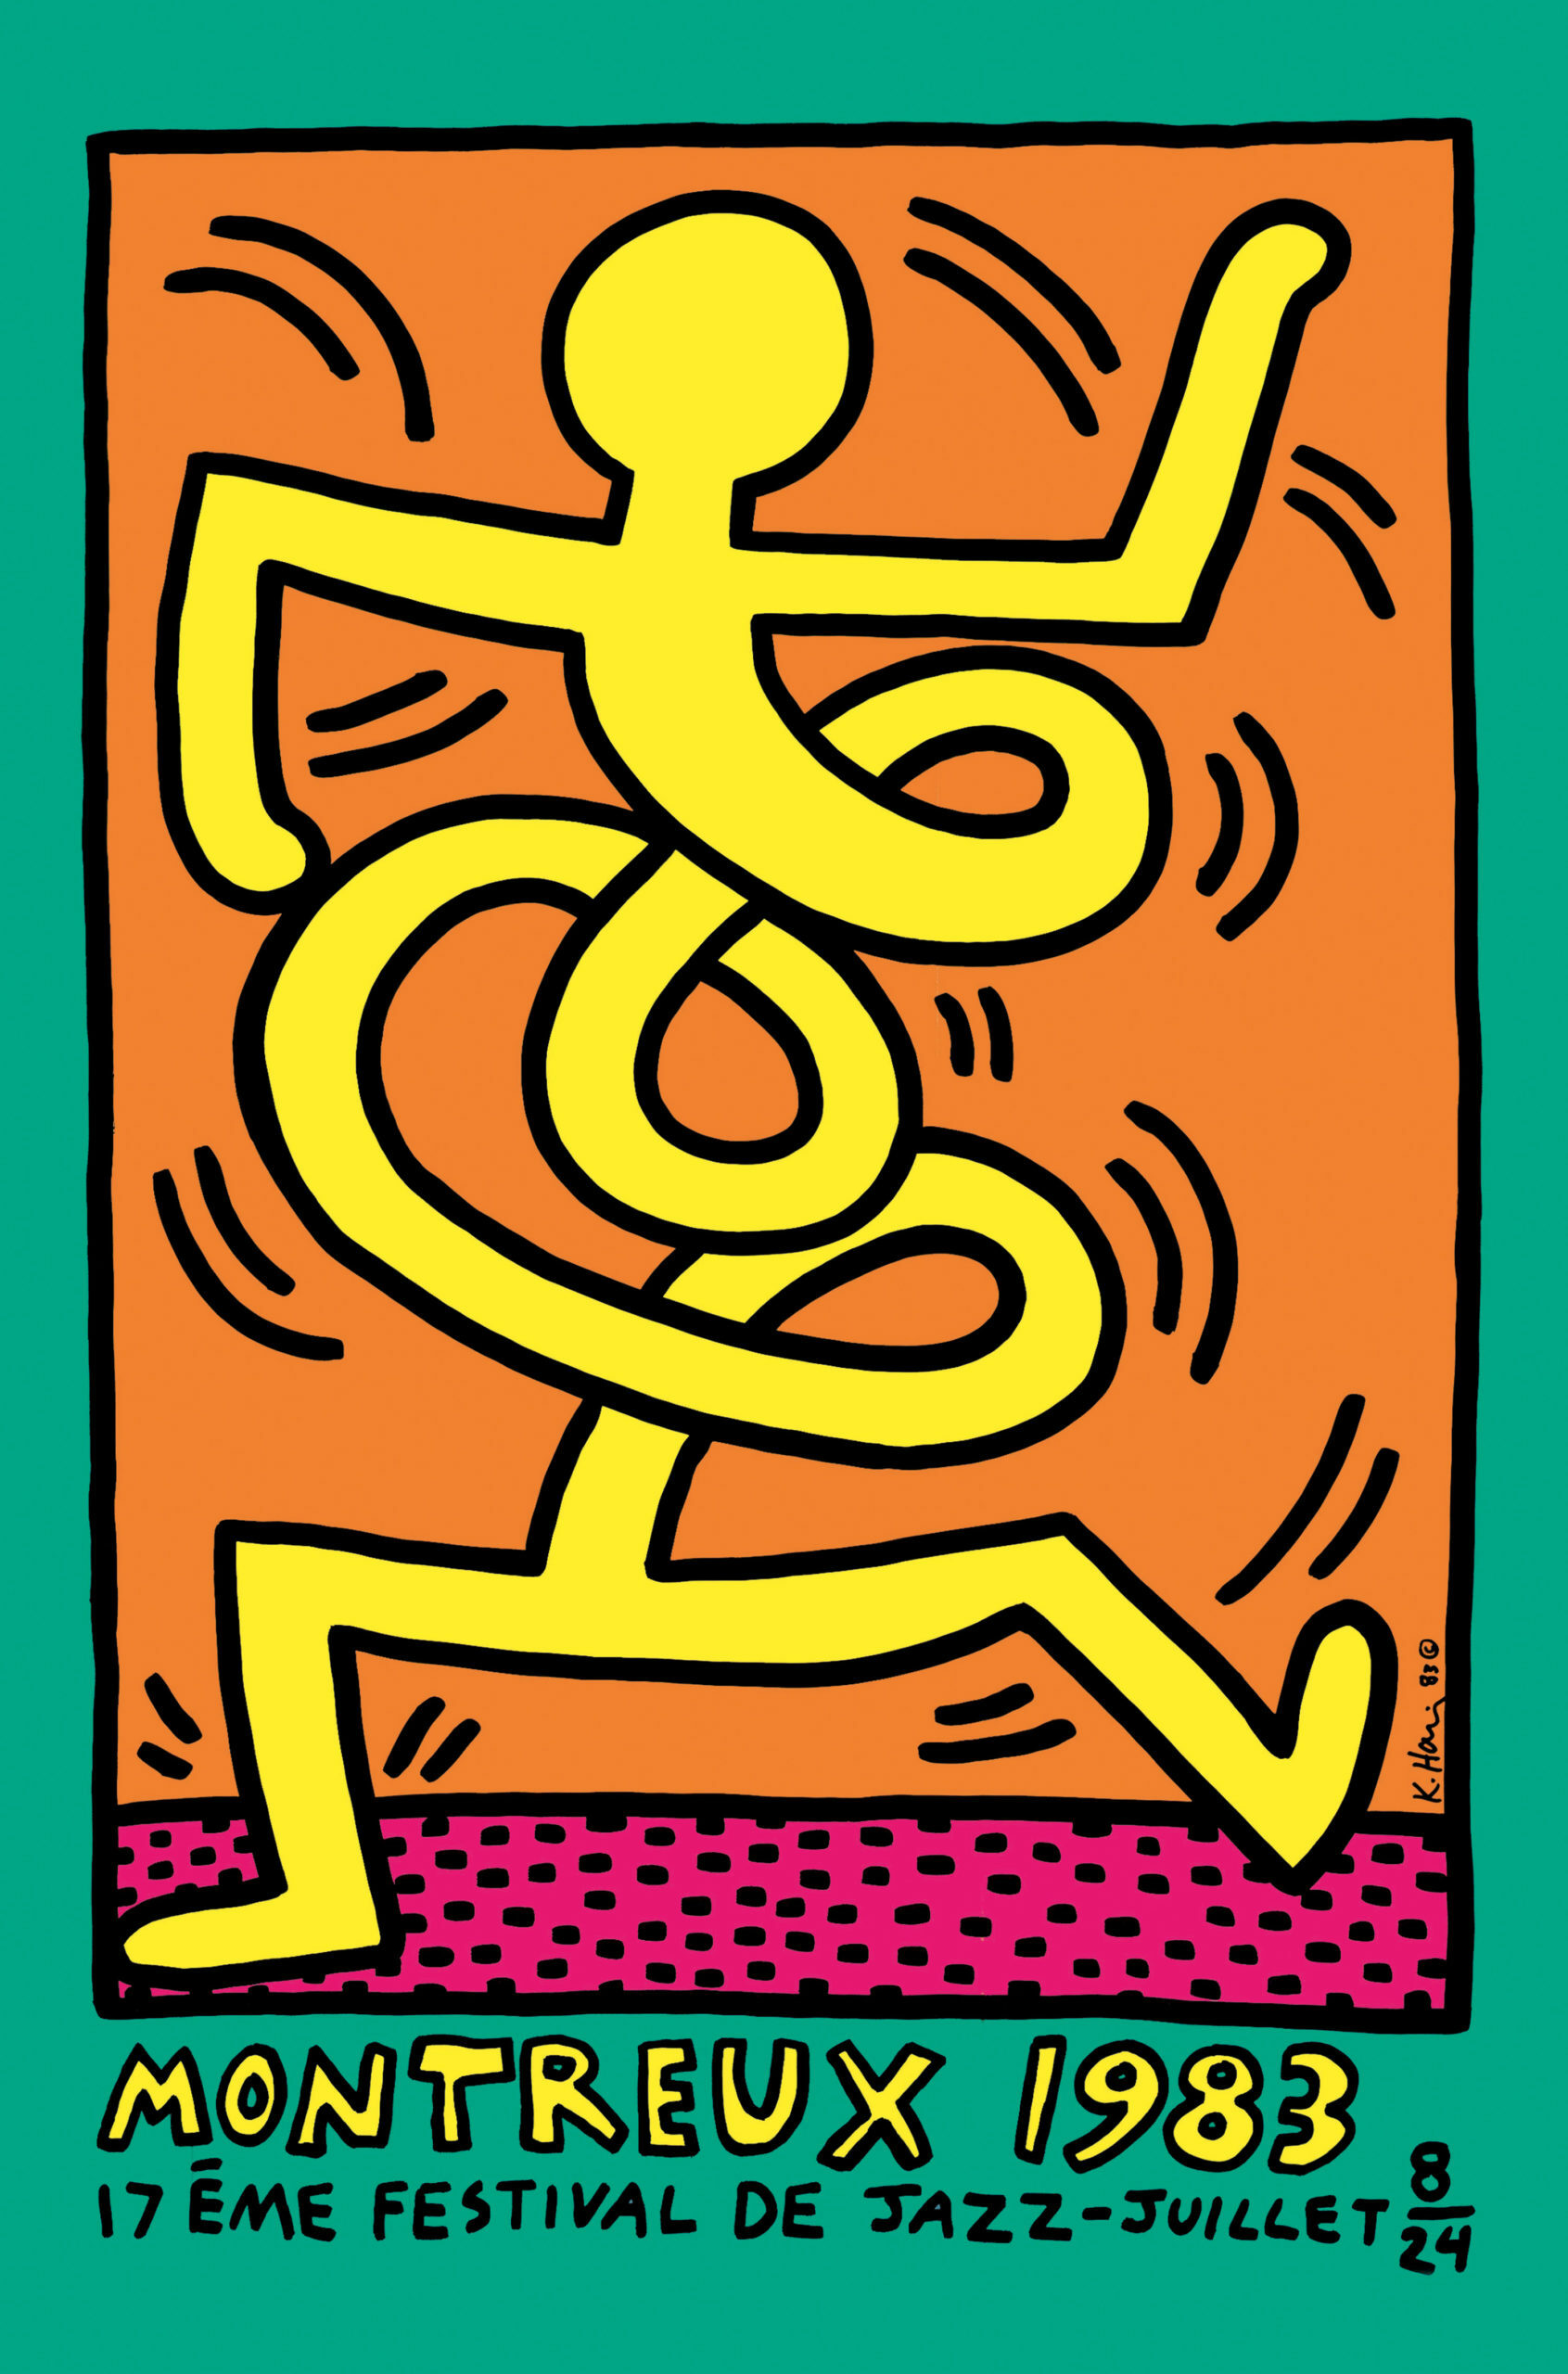 Montreux Jazz Festival ©1983, by Keith Haring